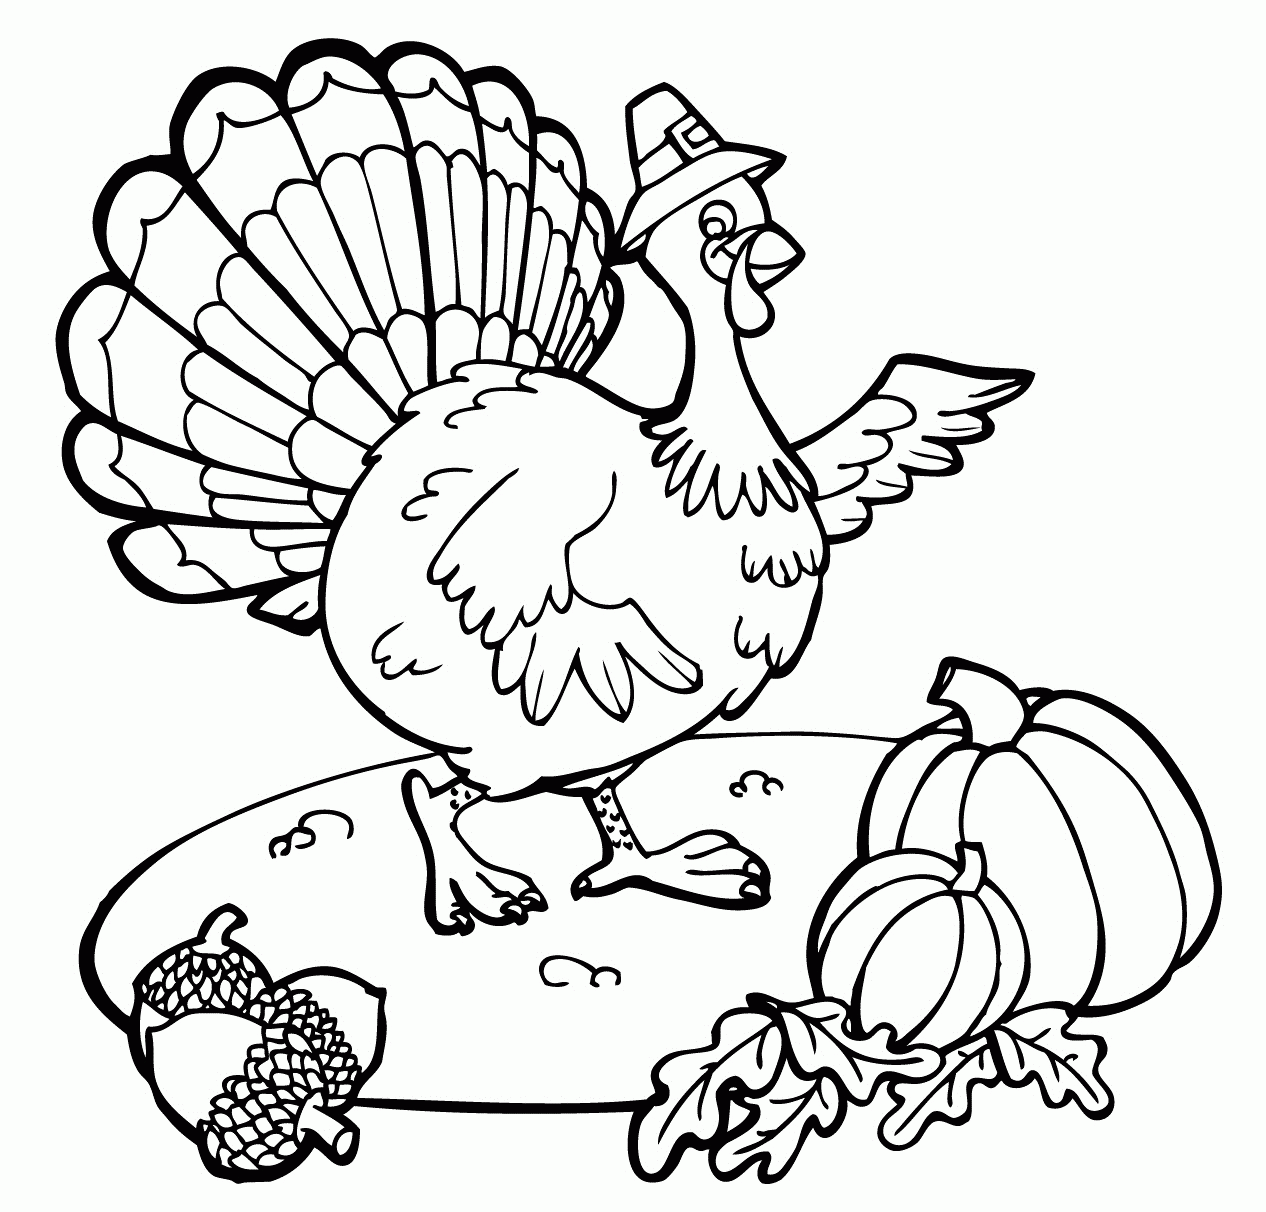 Free Printable Thanksgiving Coloring Pages For Kids - Coloring pages